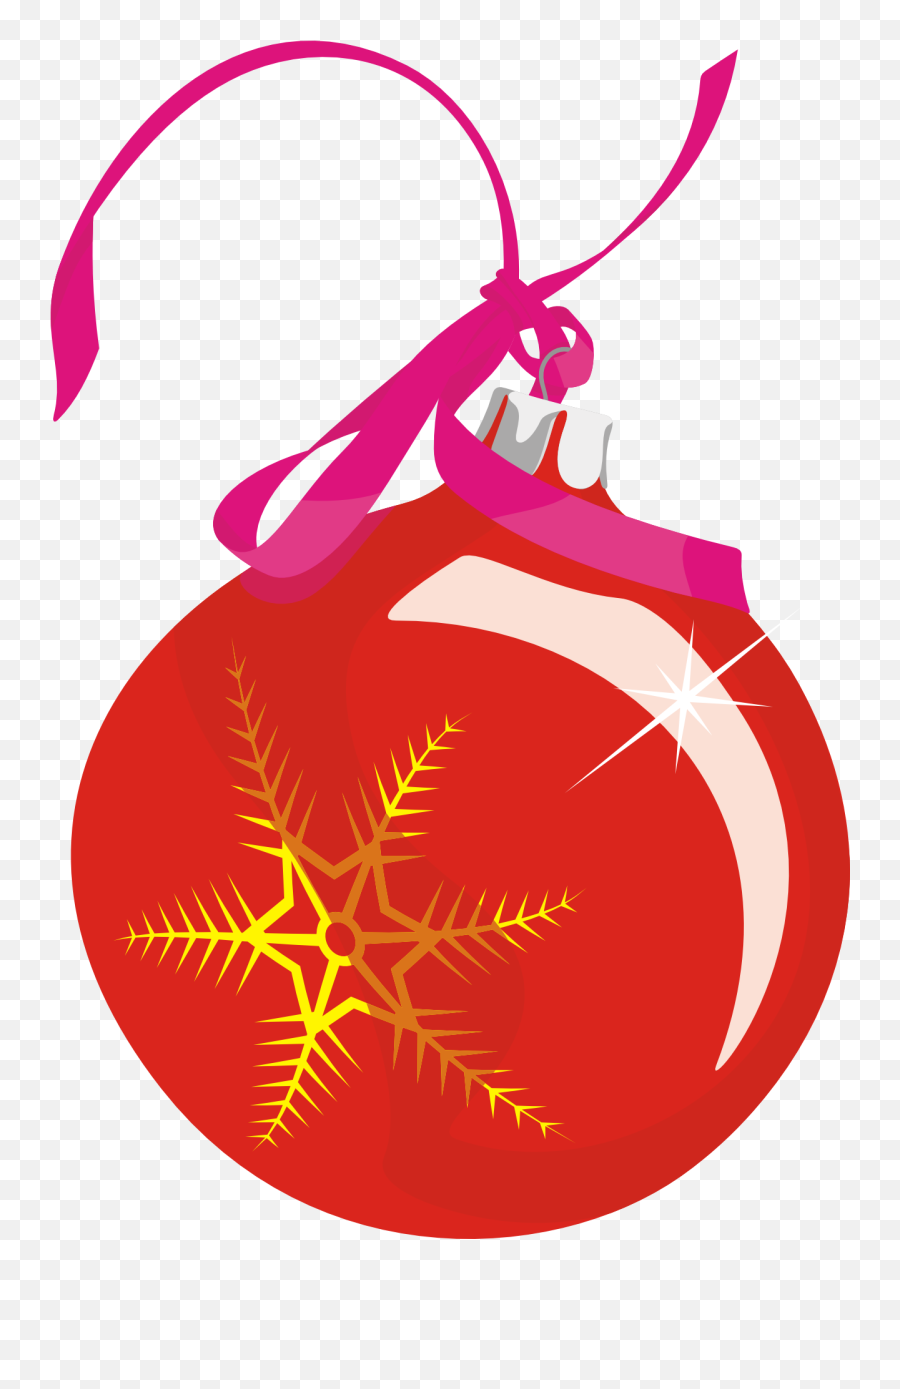 Clipart Of The Red Christmas Ball Free Image Download Emoji,Christmas Ball Clipart